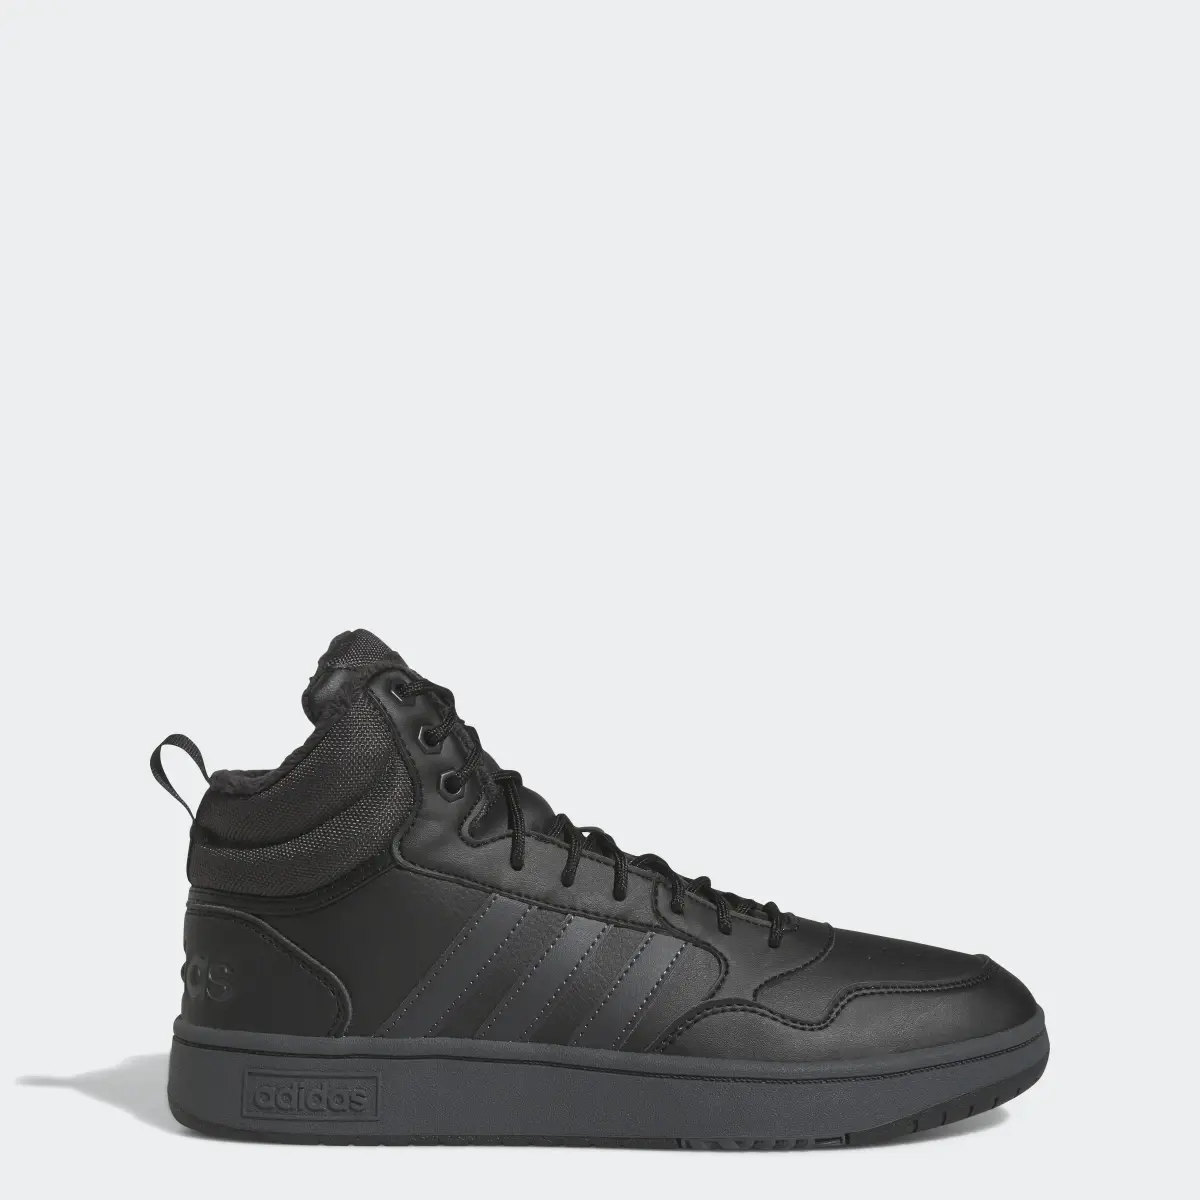 Adidas Hoops 3.0 Mid Lifestyle Basketball Classic Fur Lining Winterized Schuh. 1